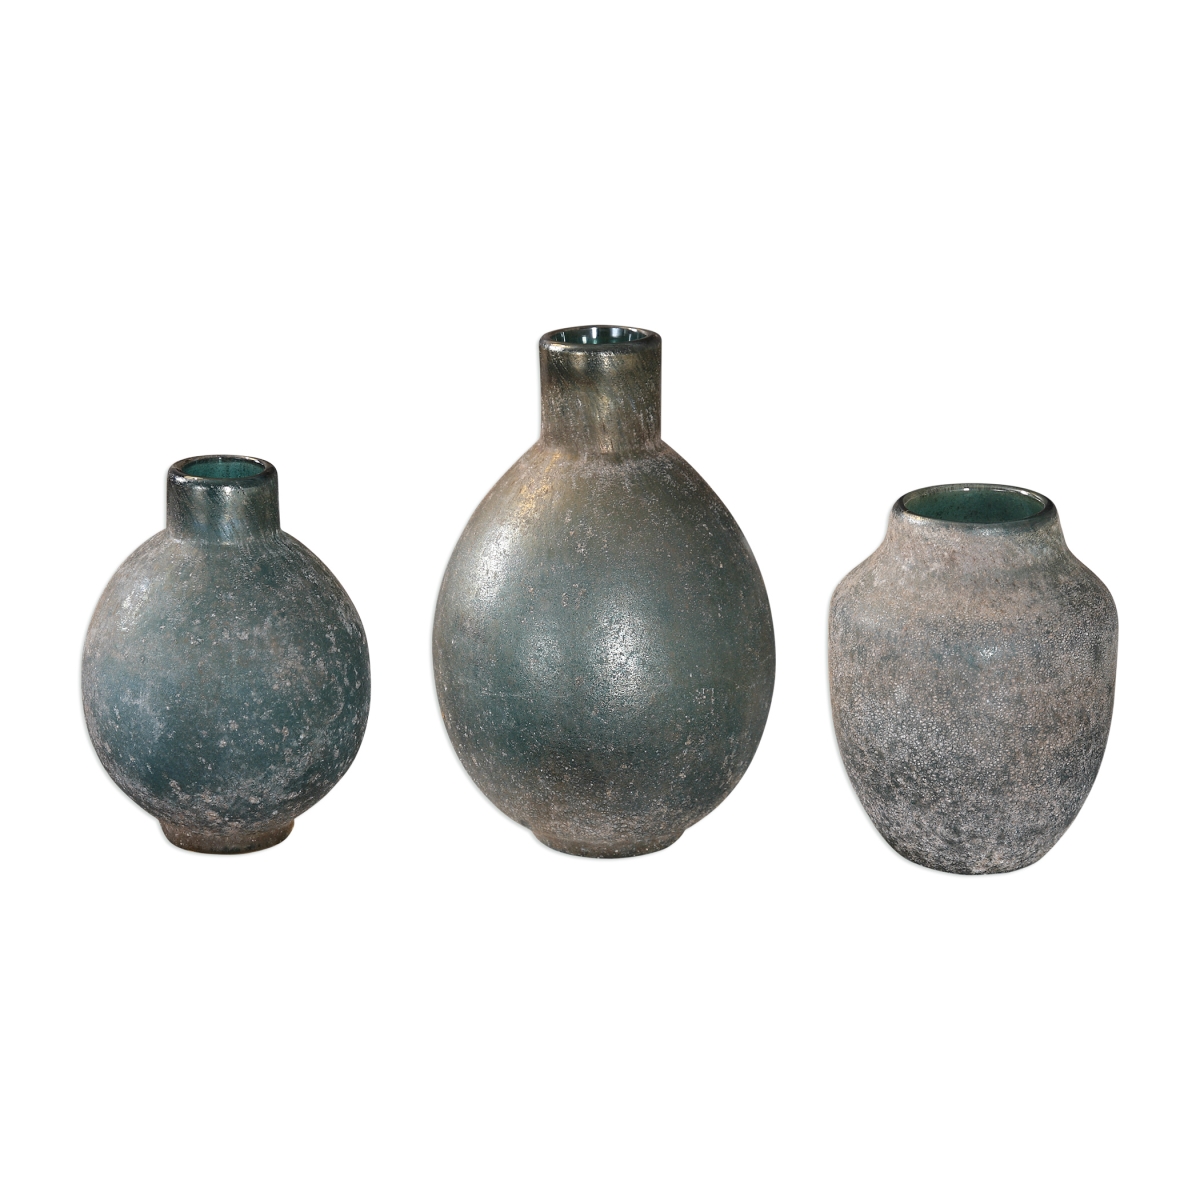 Picture of 212 Main 18844 Mercede Weathered Blue-Green Vases  Set of 3